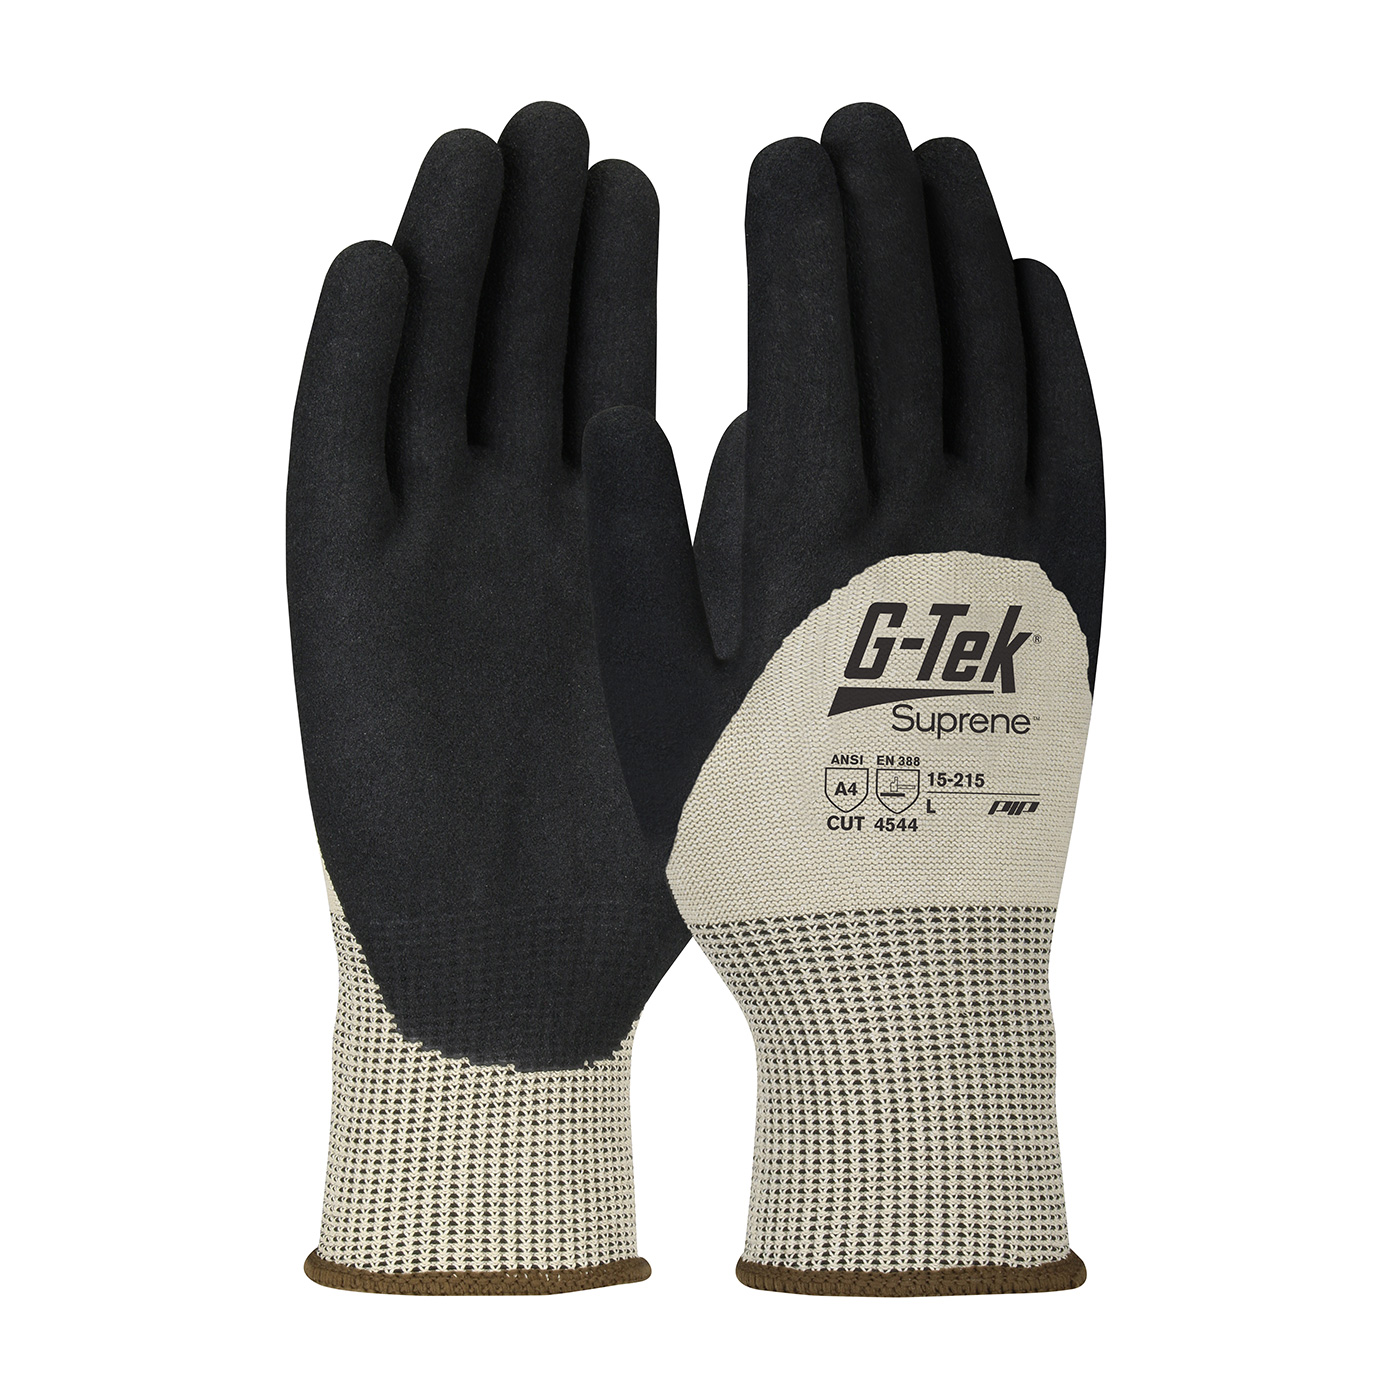 15-215 PIP® G-Tek® Suprene™ Nitrile MicroSurface coated palm, fingers and knuckle 